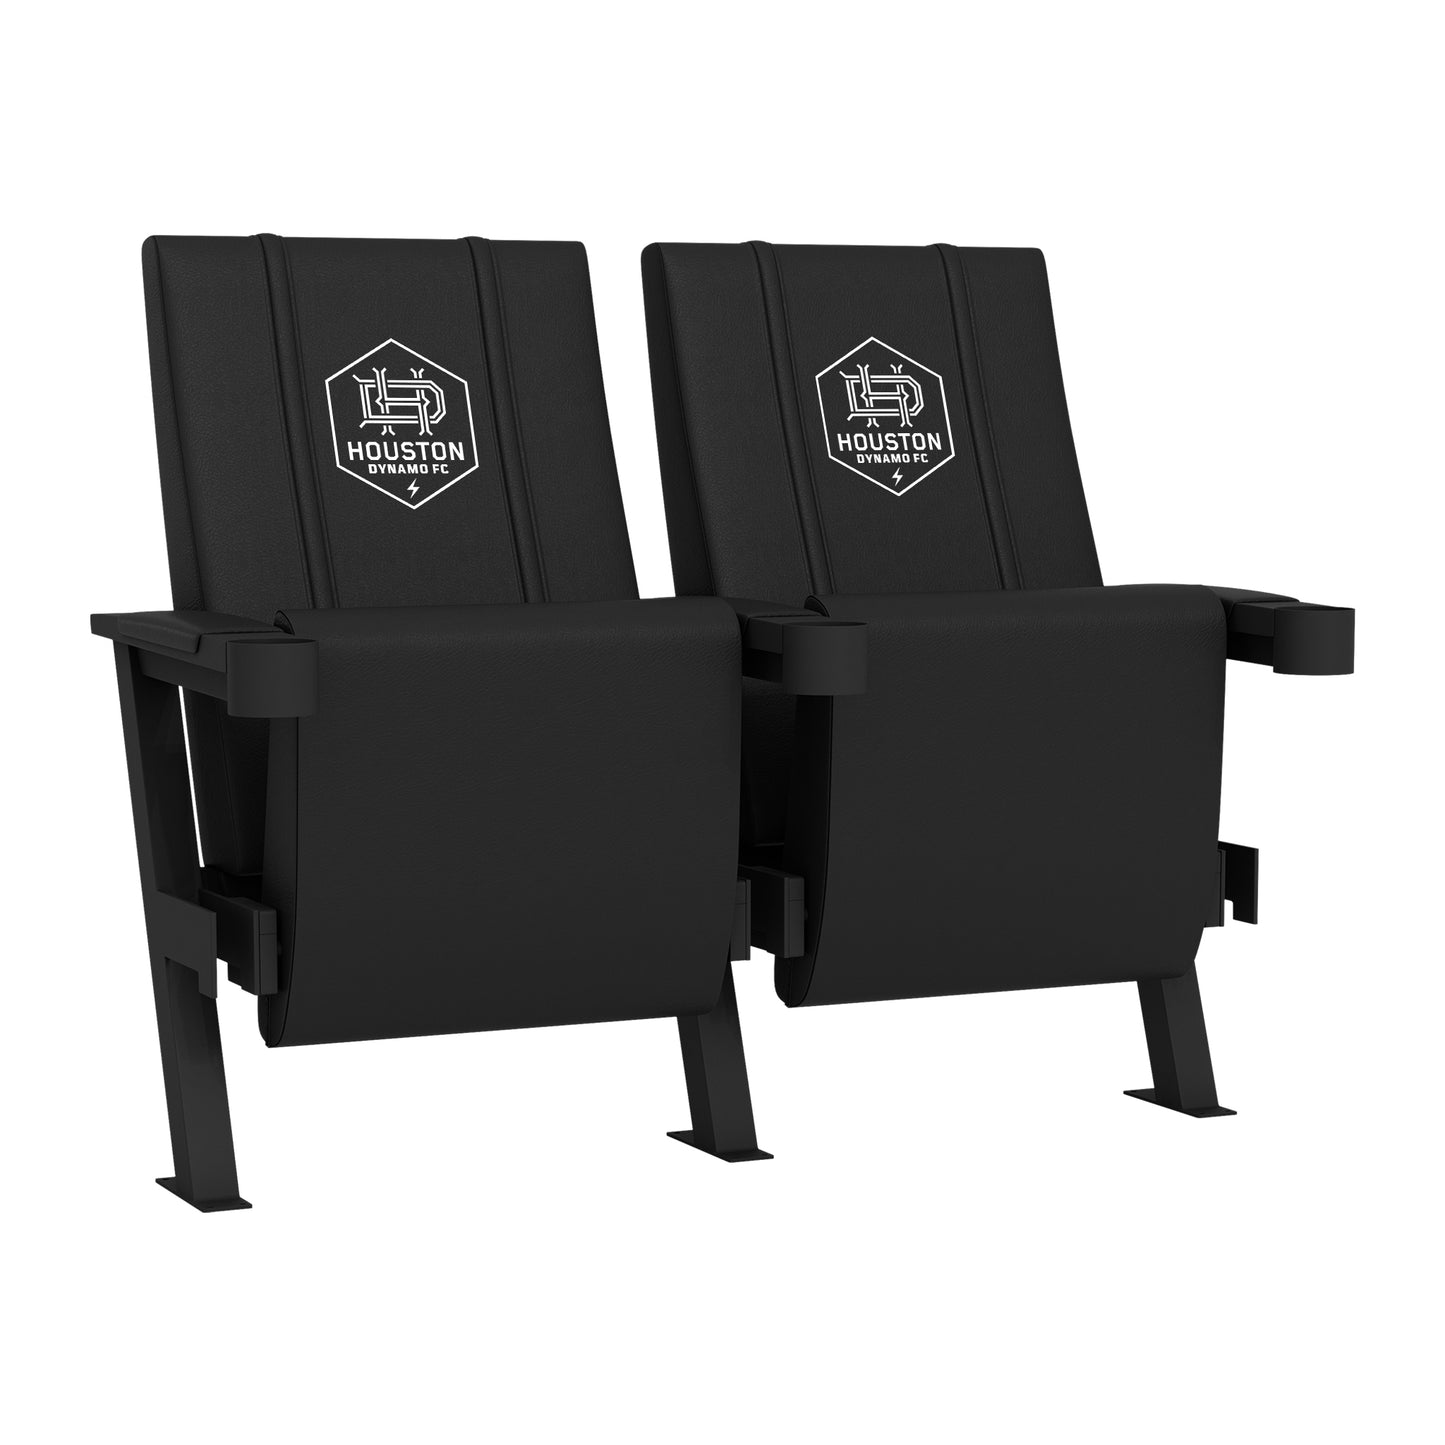 SuiteMax 3.5 VIP Seats with Houston Dynamo Secondary Logo